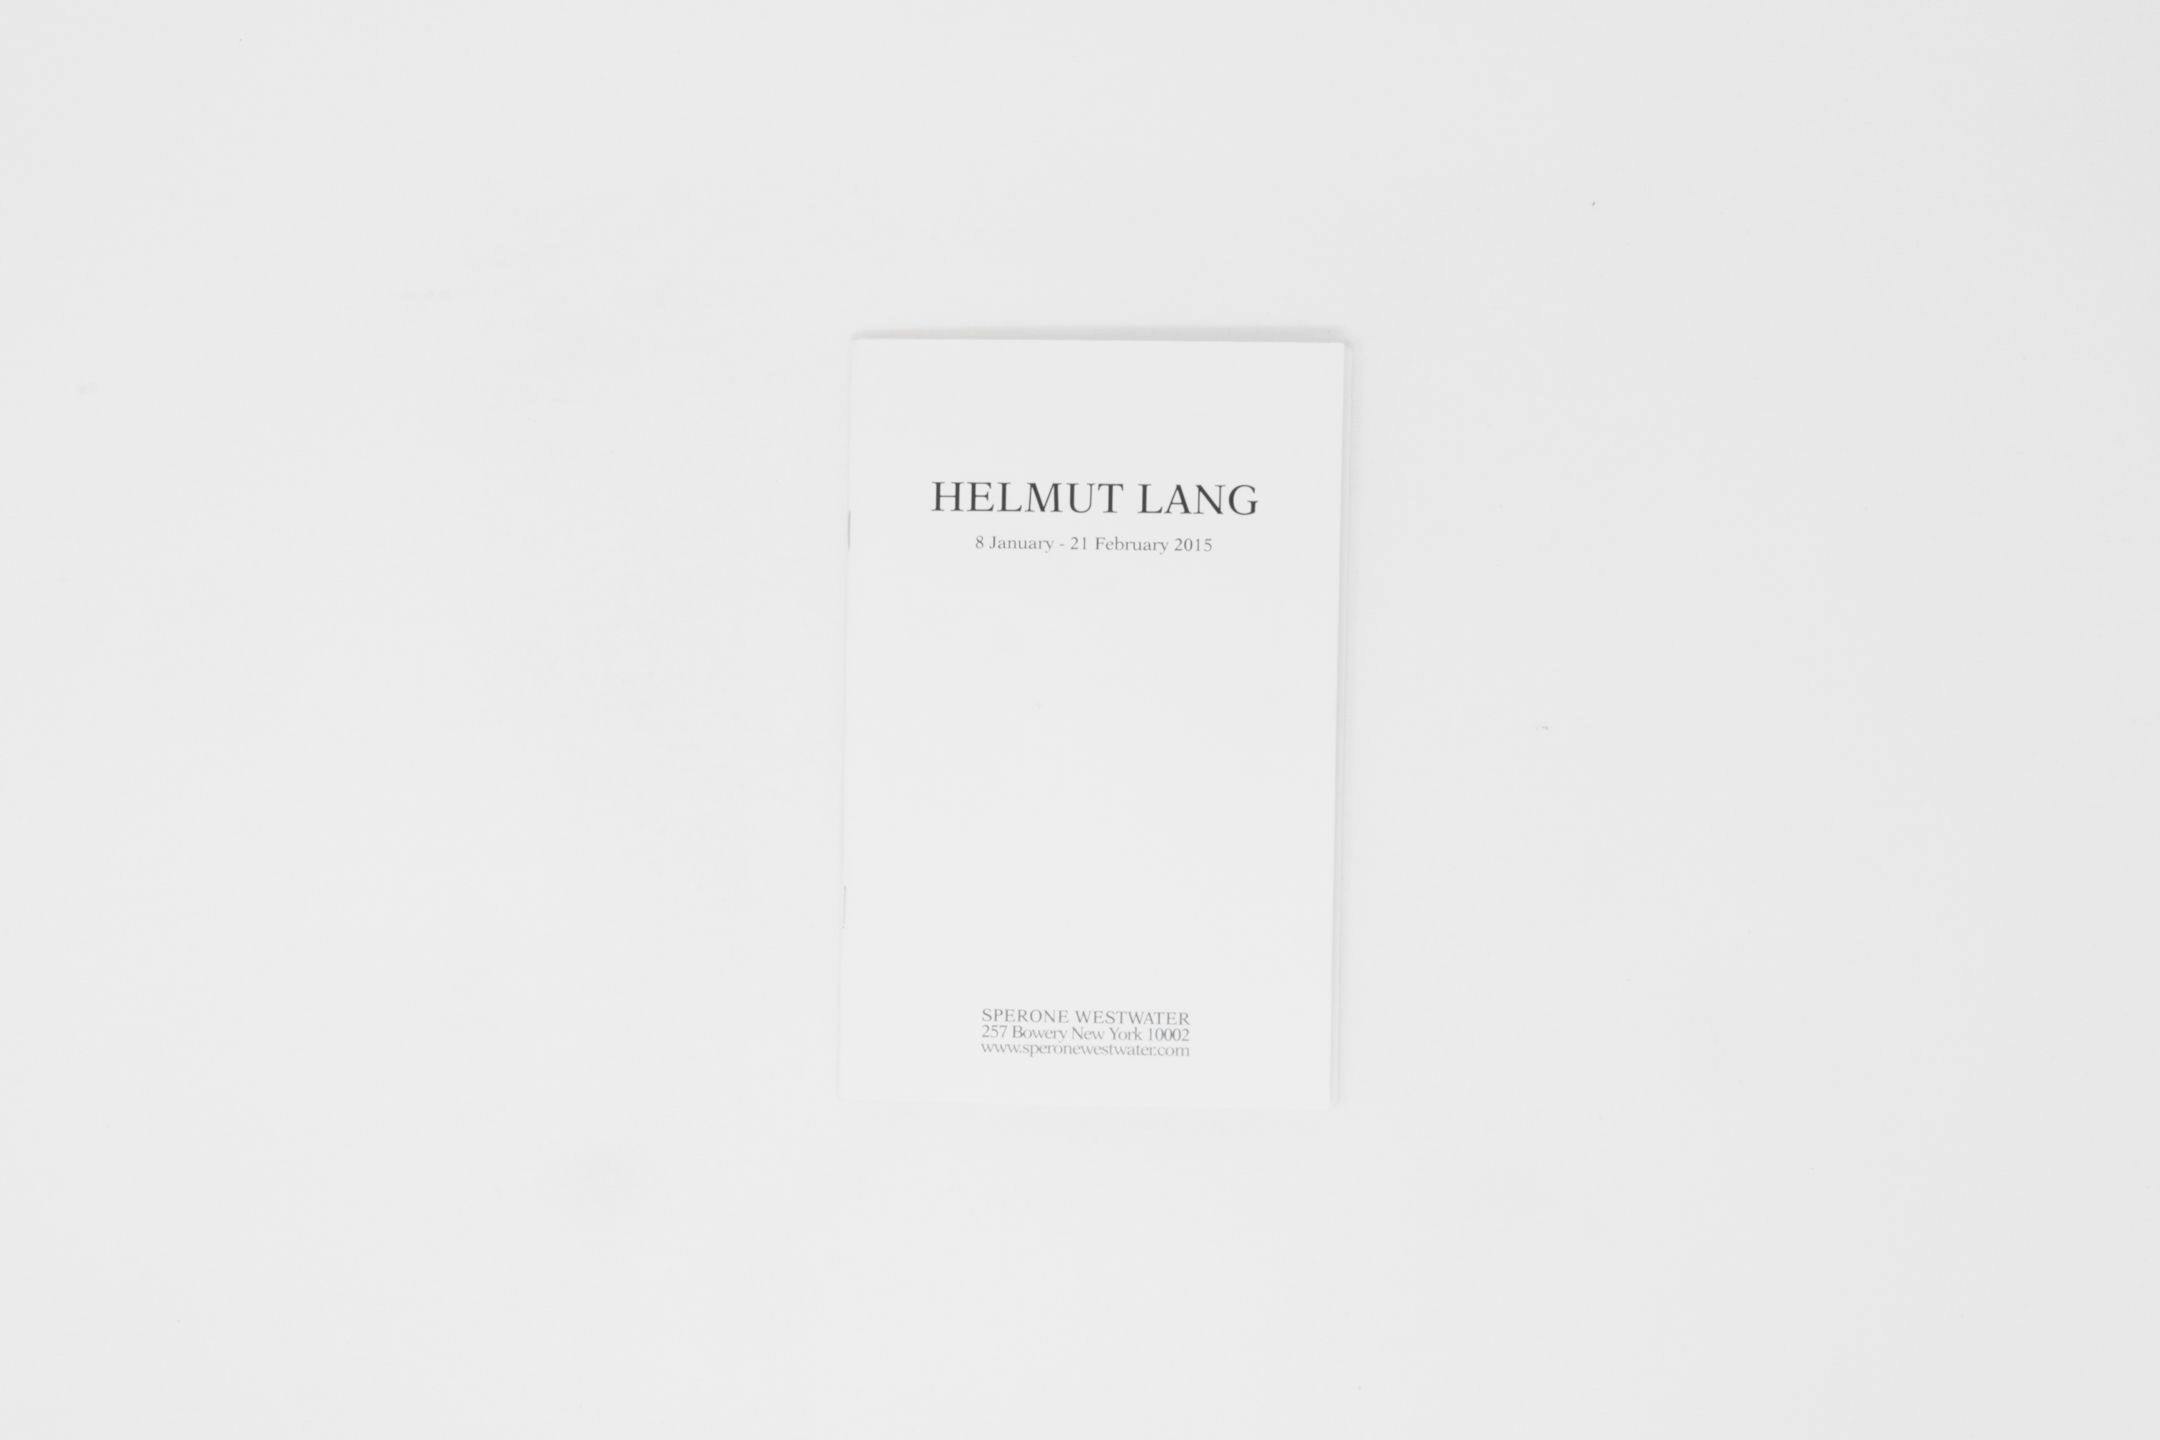 Helmut Lang AW 02-03 Postcard  International Library of Fashion Research